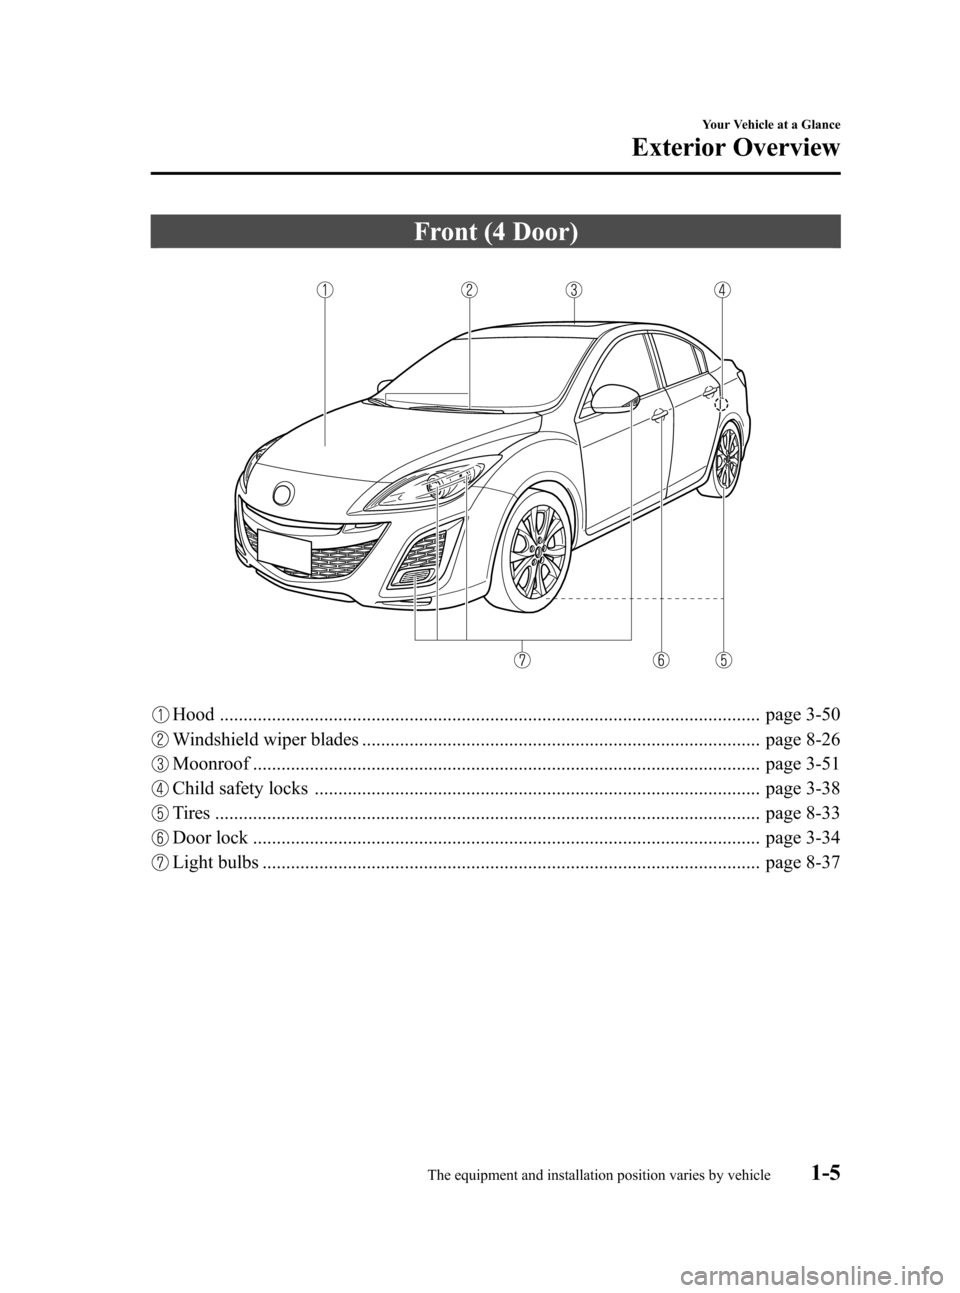 MAZDA MODEL 3 HATCHBACK 2010  Owners Manual (in English) Black plate (11,1)
Front (4 Door)
Hood .................................................................................................................. page 3-50
Windshield wiper blades ............